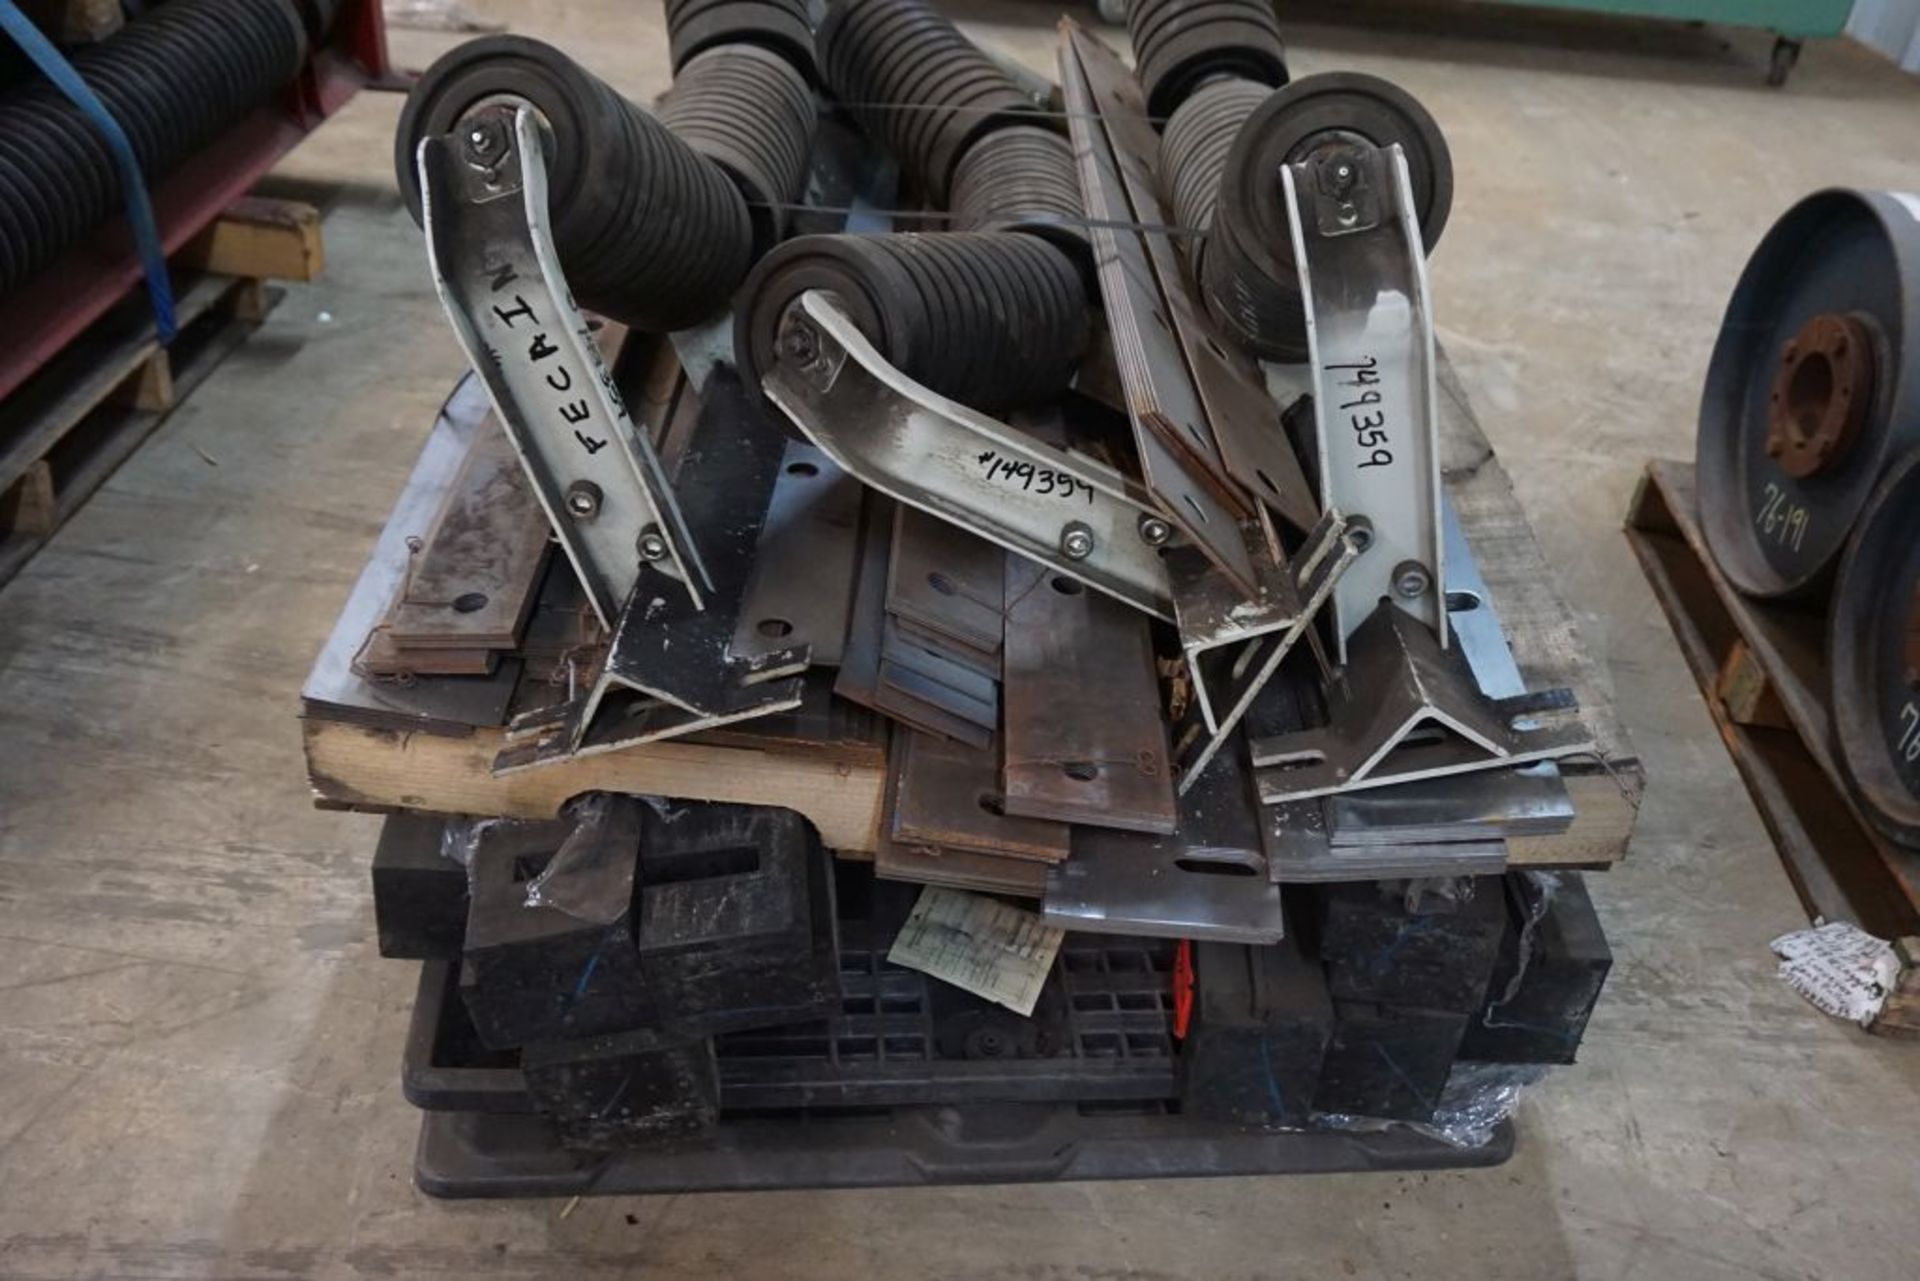 Lot of (5) 6"Diameter Training Idlers|34" Working Width; 54" Overall Width|Lot Loading Fee: $5.00 - Image 2 of 6